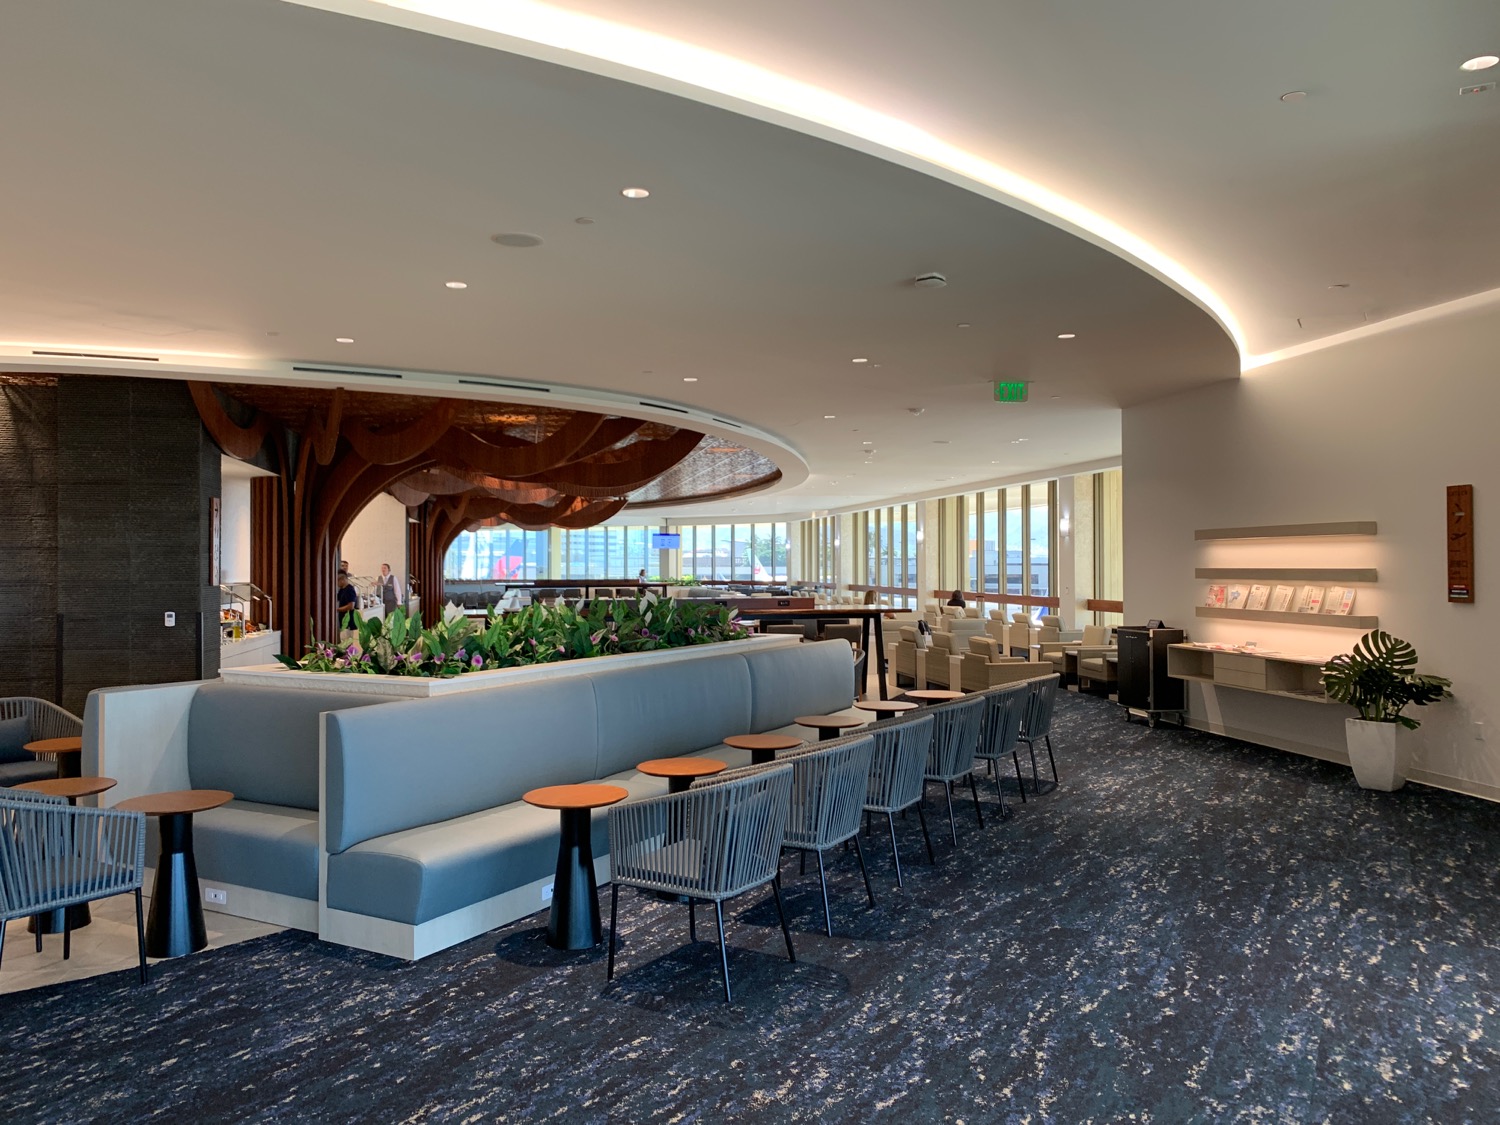 A Superb New Star Alliance Lounge In Honolulu Is Available To United Flyers  - Live and Let's Fly